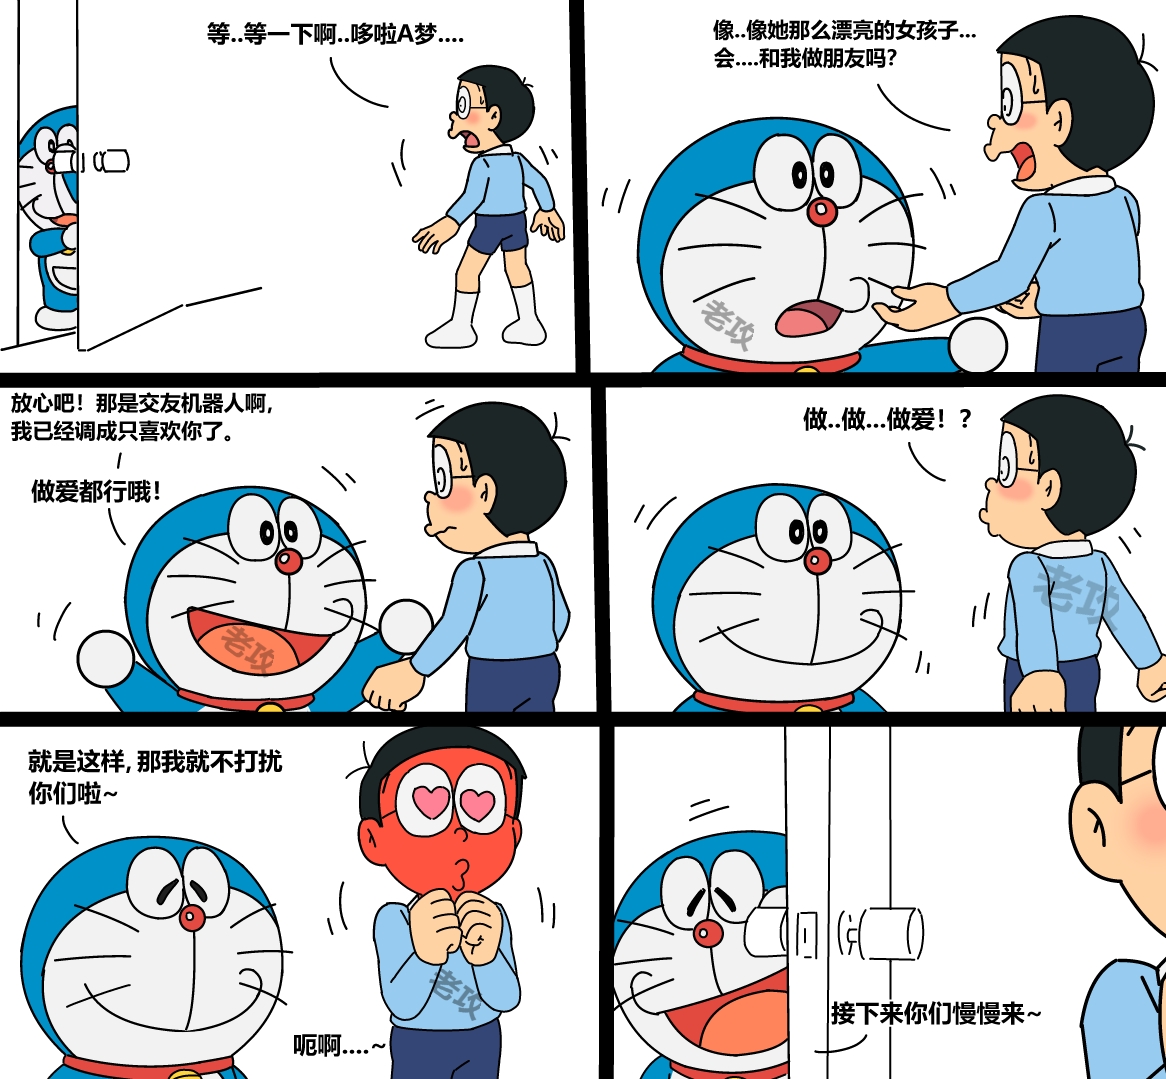 [Lao Gong] I Love Robot Girls (Part 1-2) (Doraemon) [Chinese] - Page 8